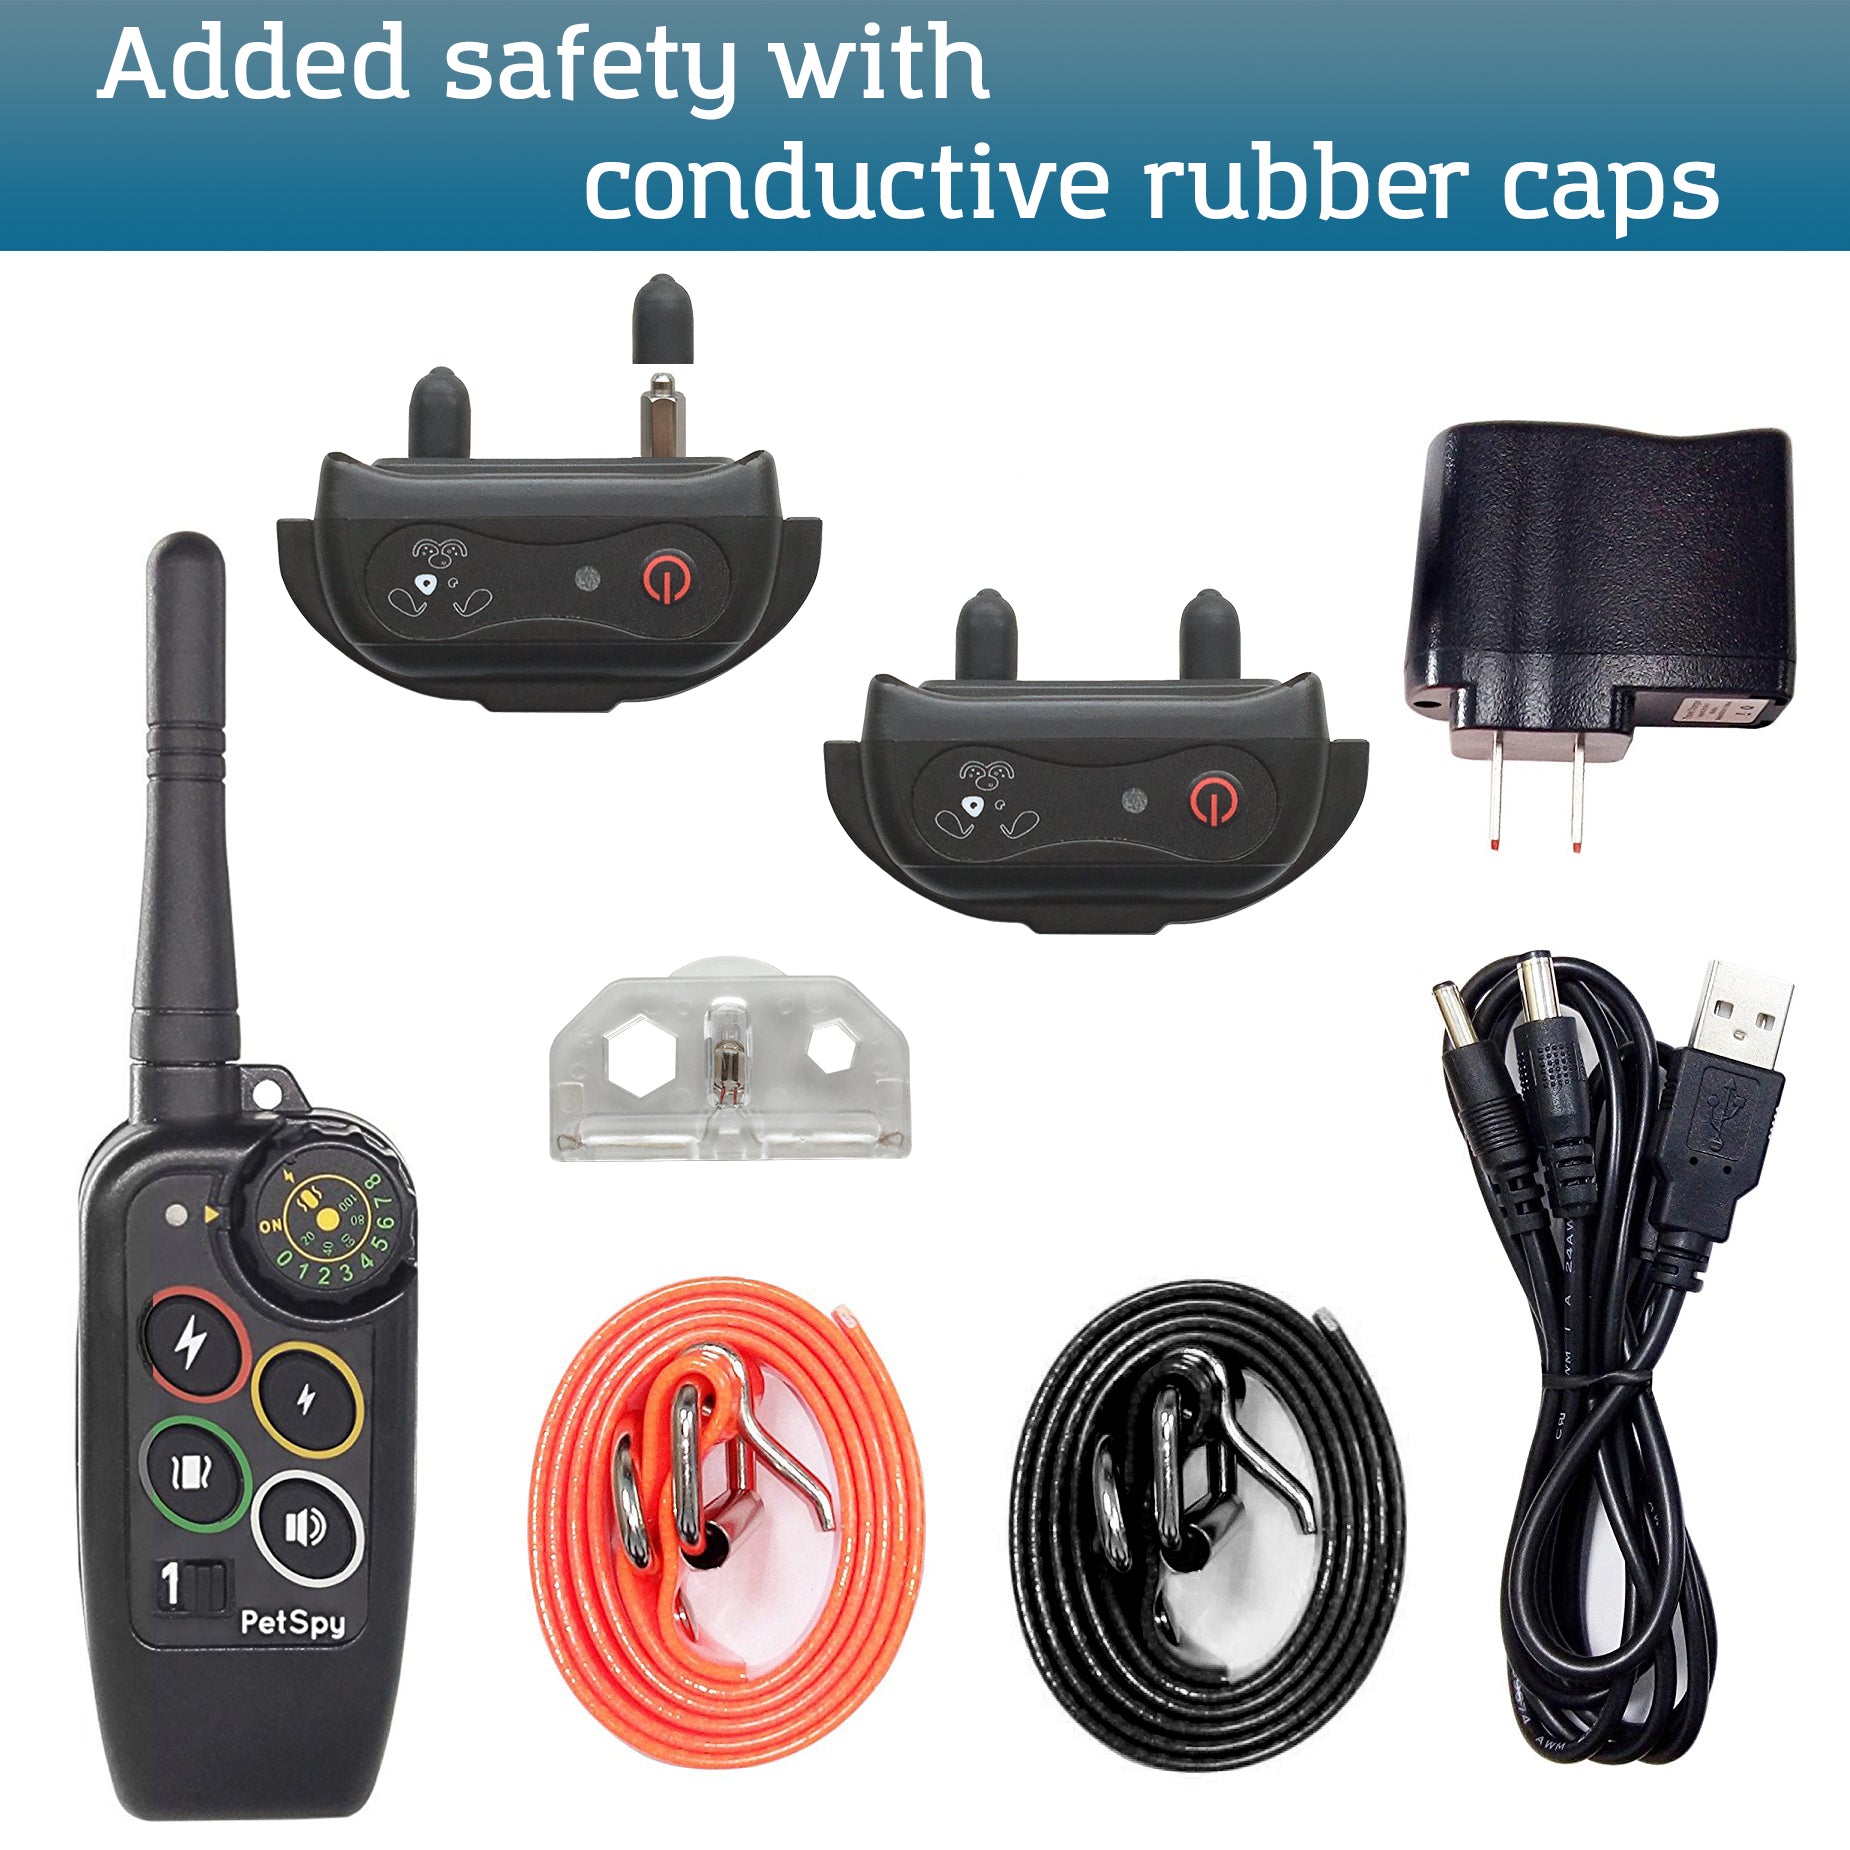 include_Remote Transmitter_Collar Receiver_Adjustable TPU Strap_Dual USB Charger_Test Bulb and User Guide